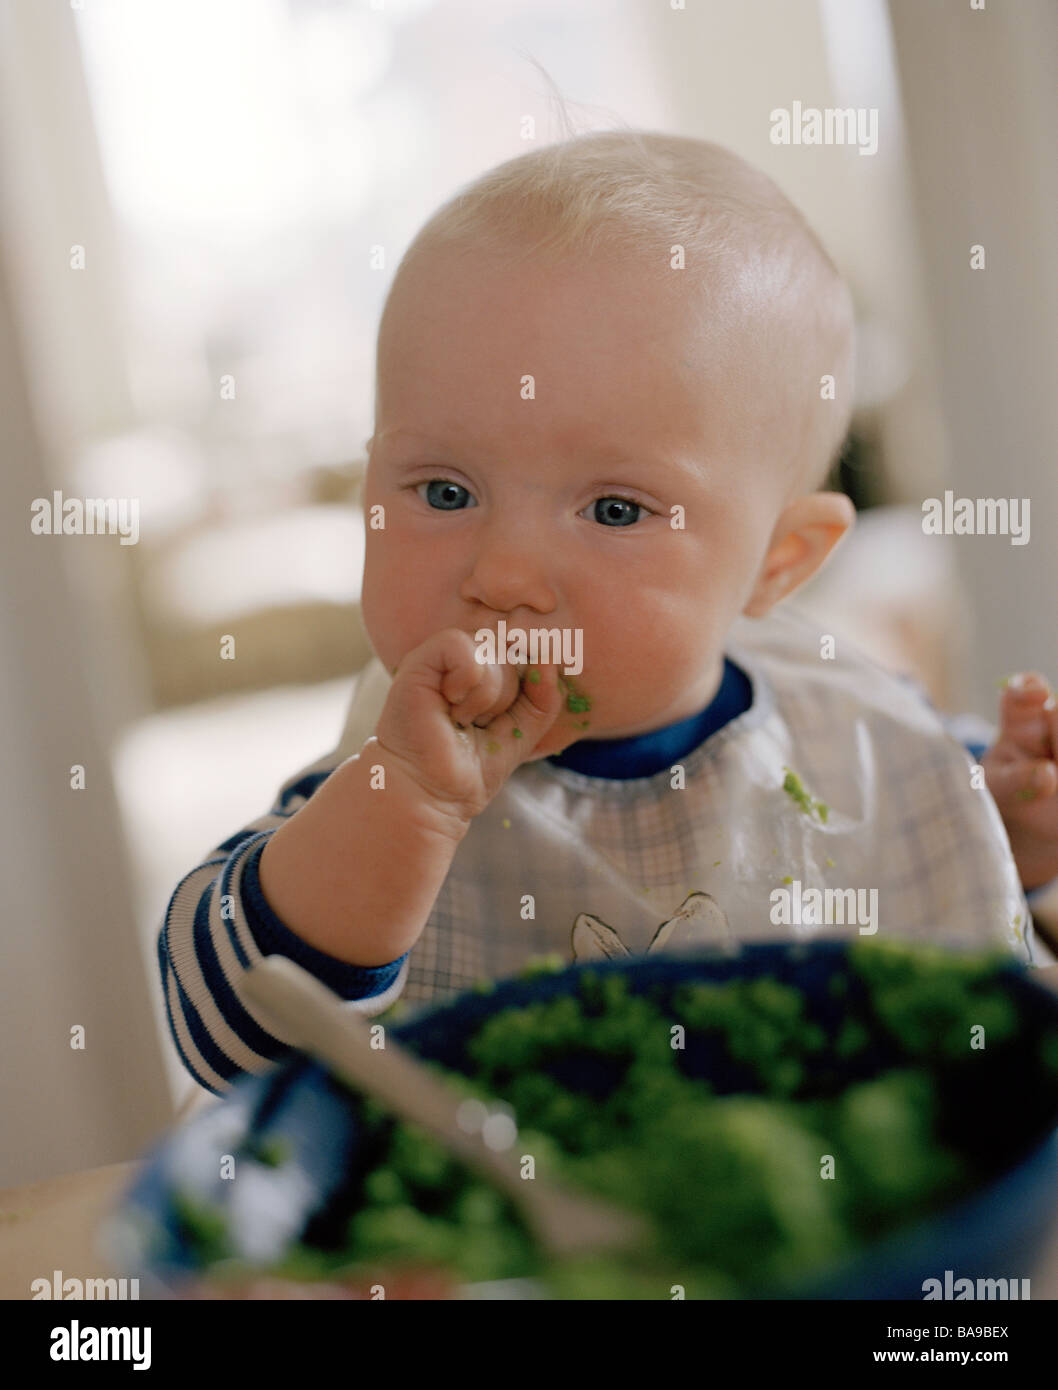 A baby eating, Sweden. Stock Photo